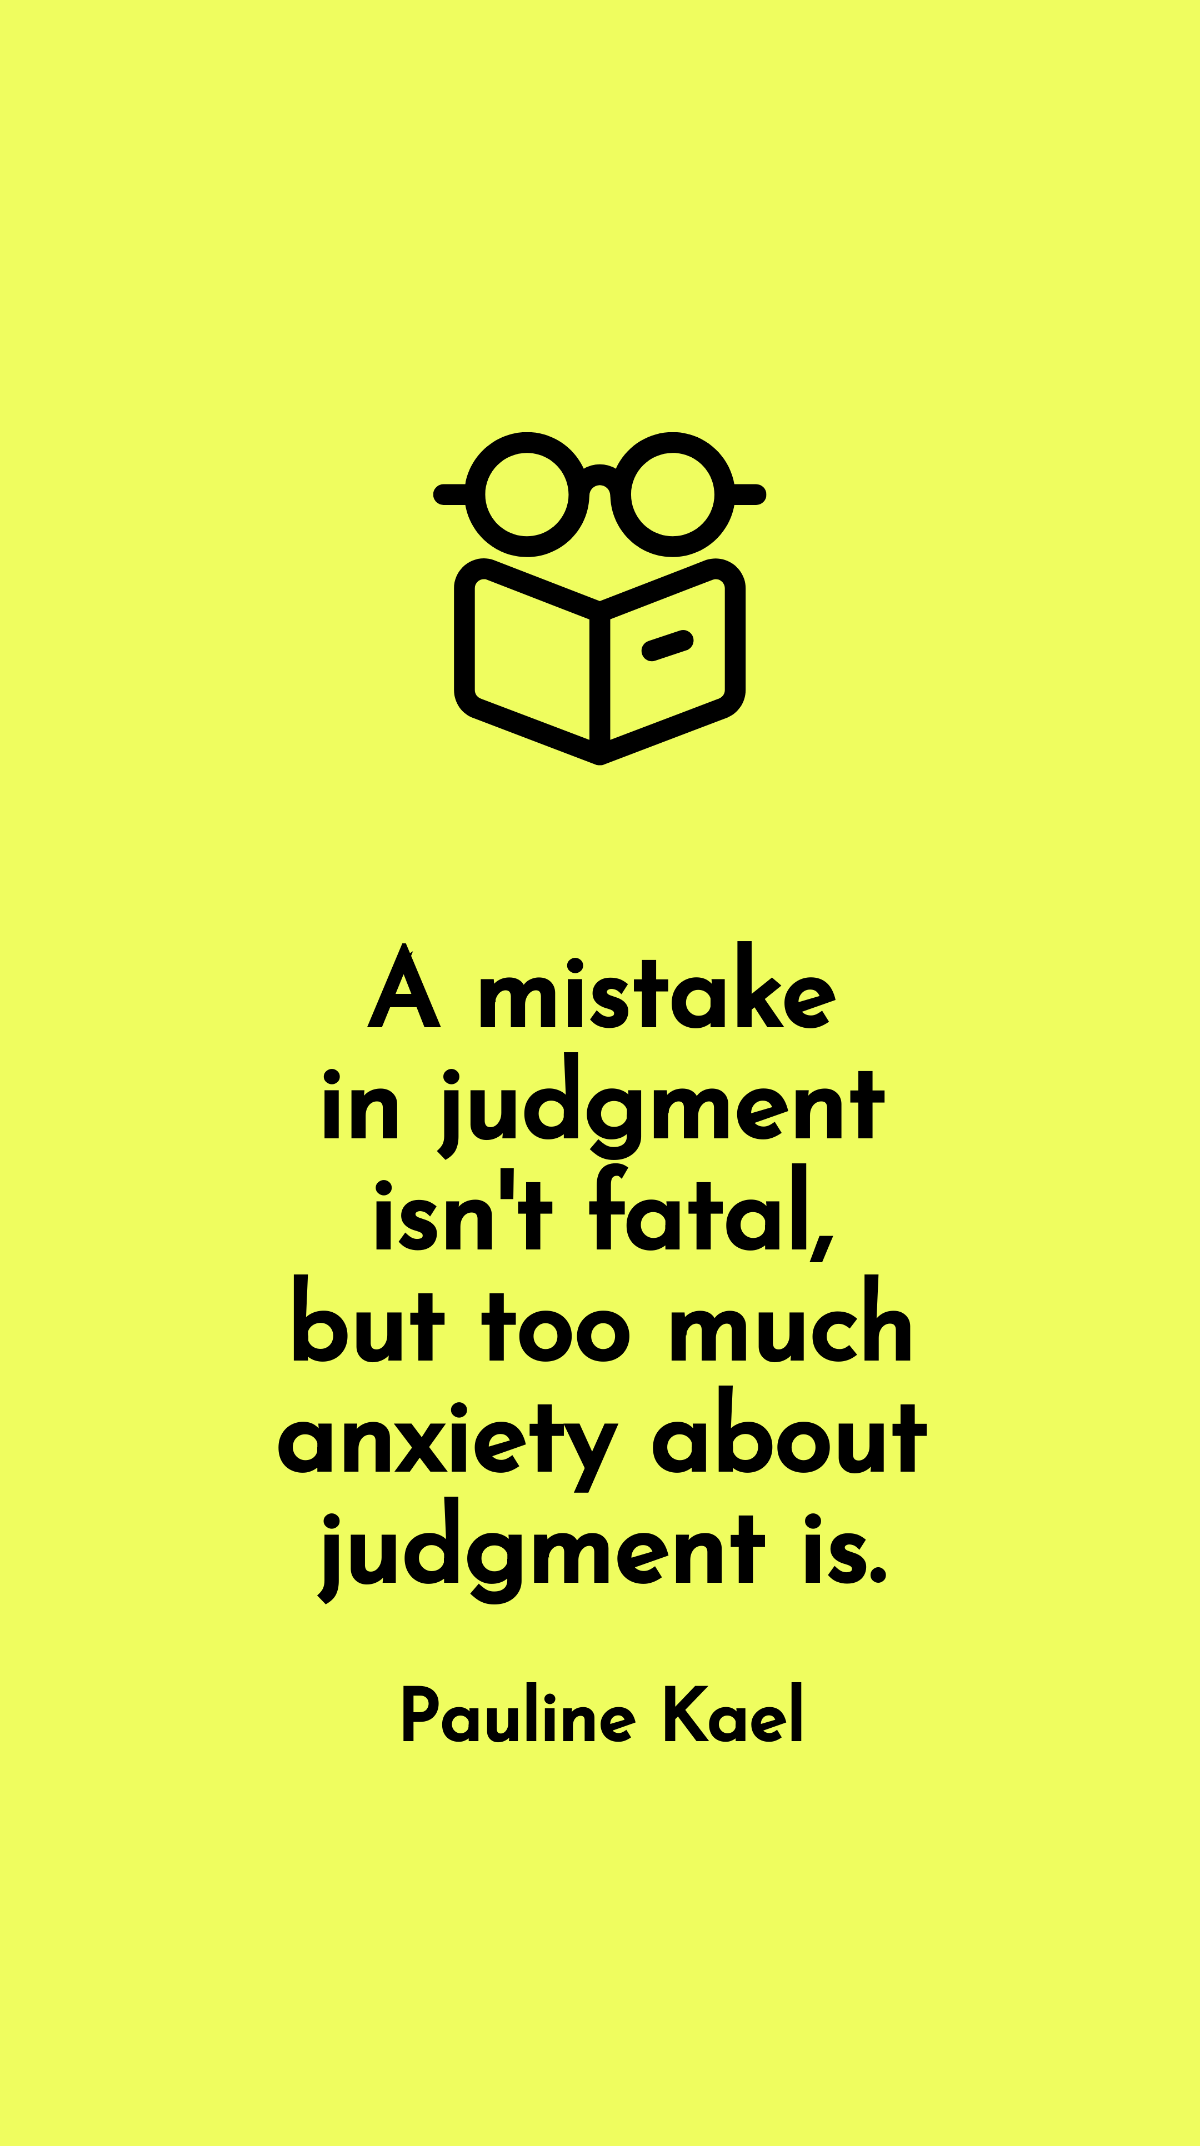 Free Pauline Kael - A mistake in judgment isn't fatal, but too much anxiety about judgment is. Template